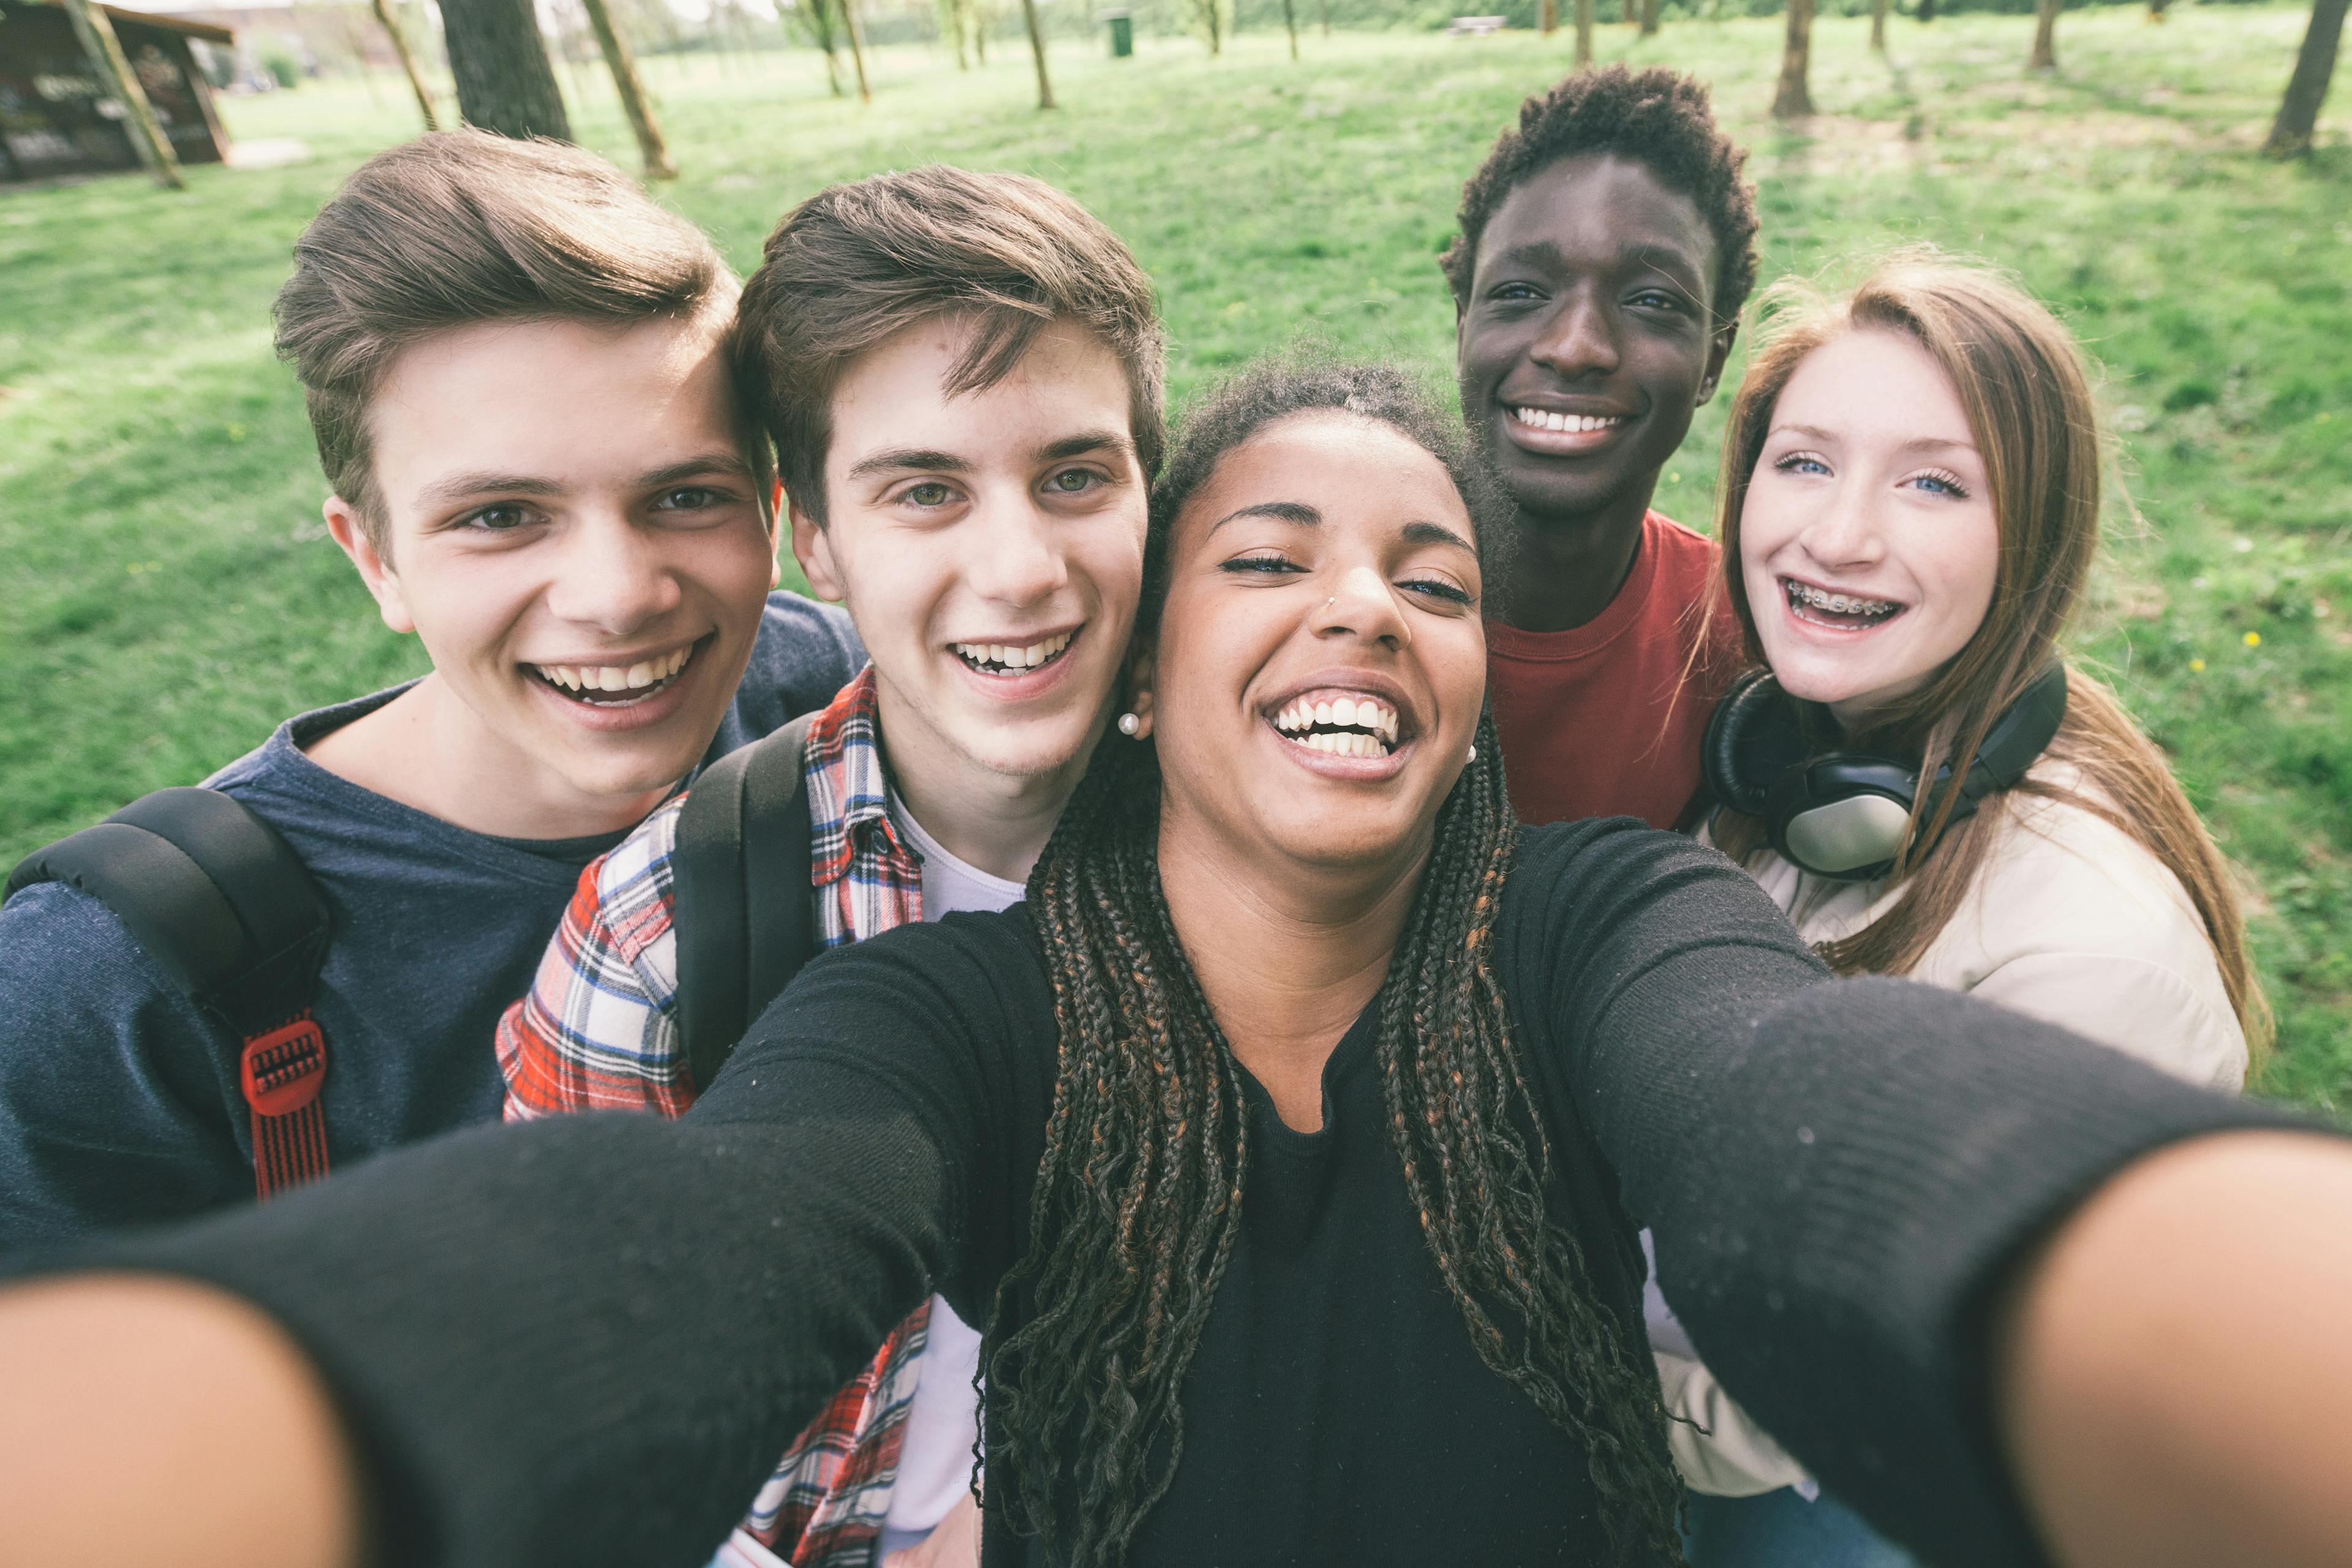 A diverse group of young people smiling and taking a selfie together